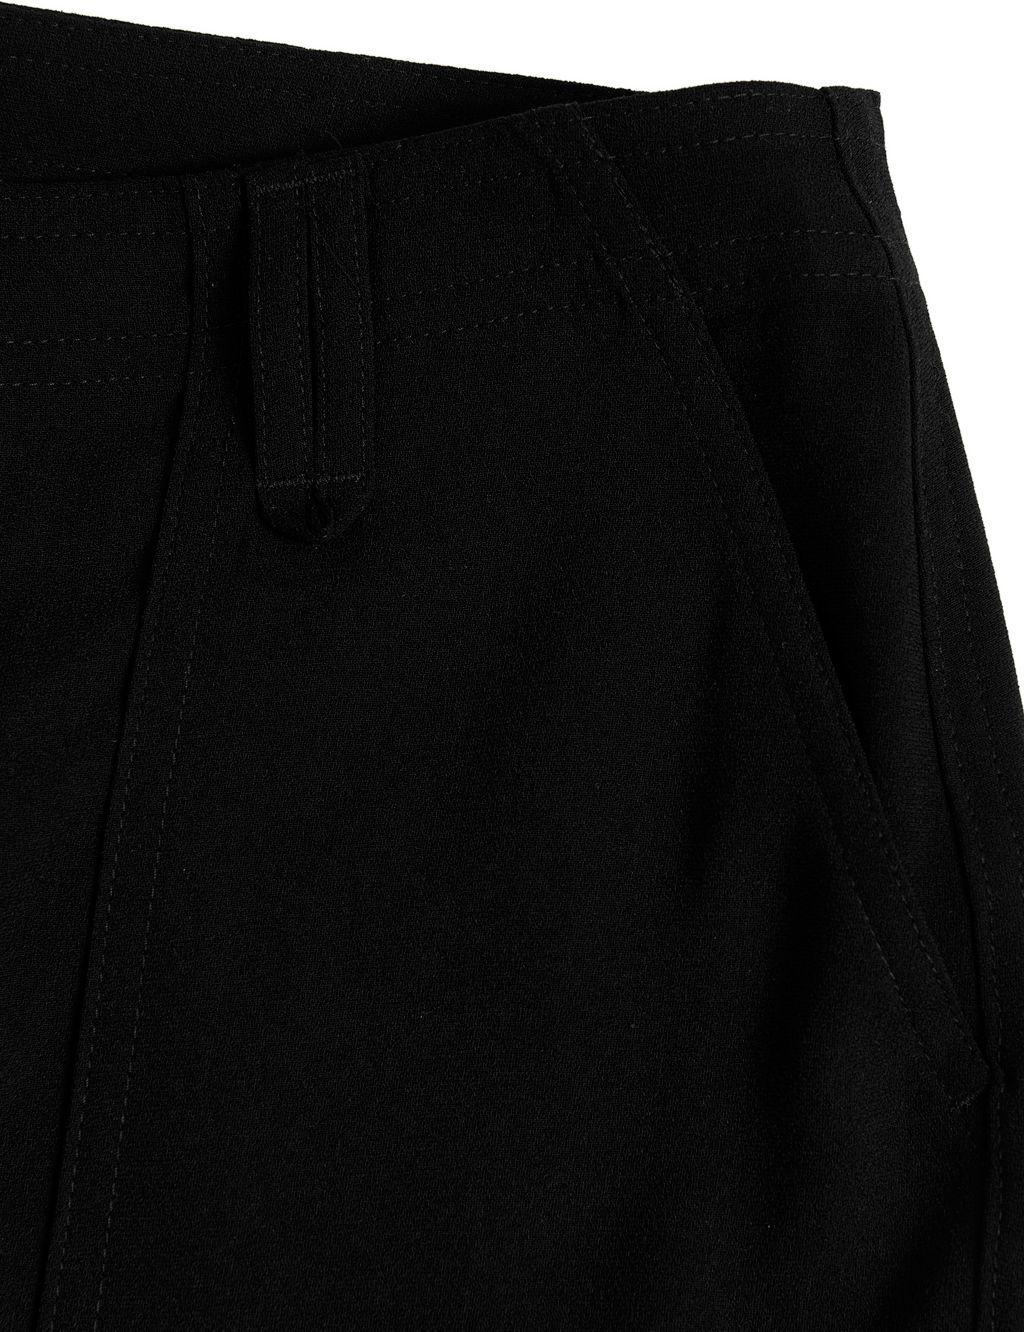 Crepe Cargo Relaxed Trousers image 4